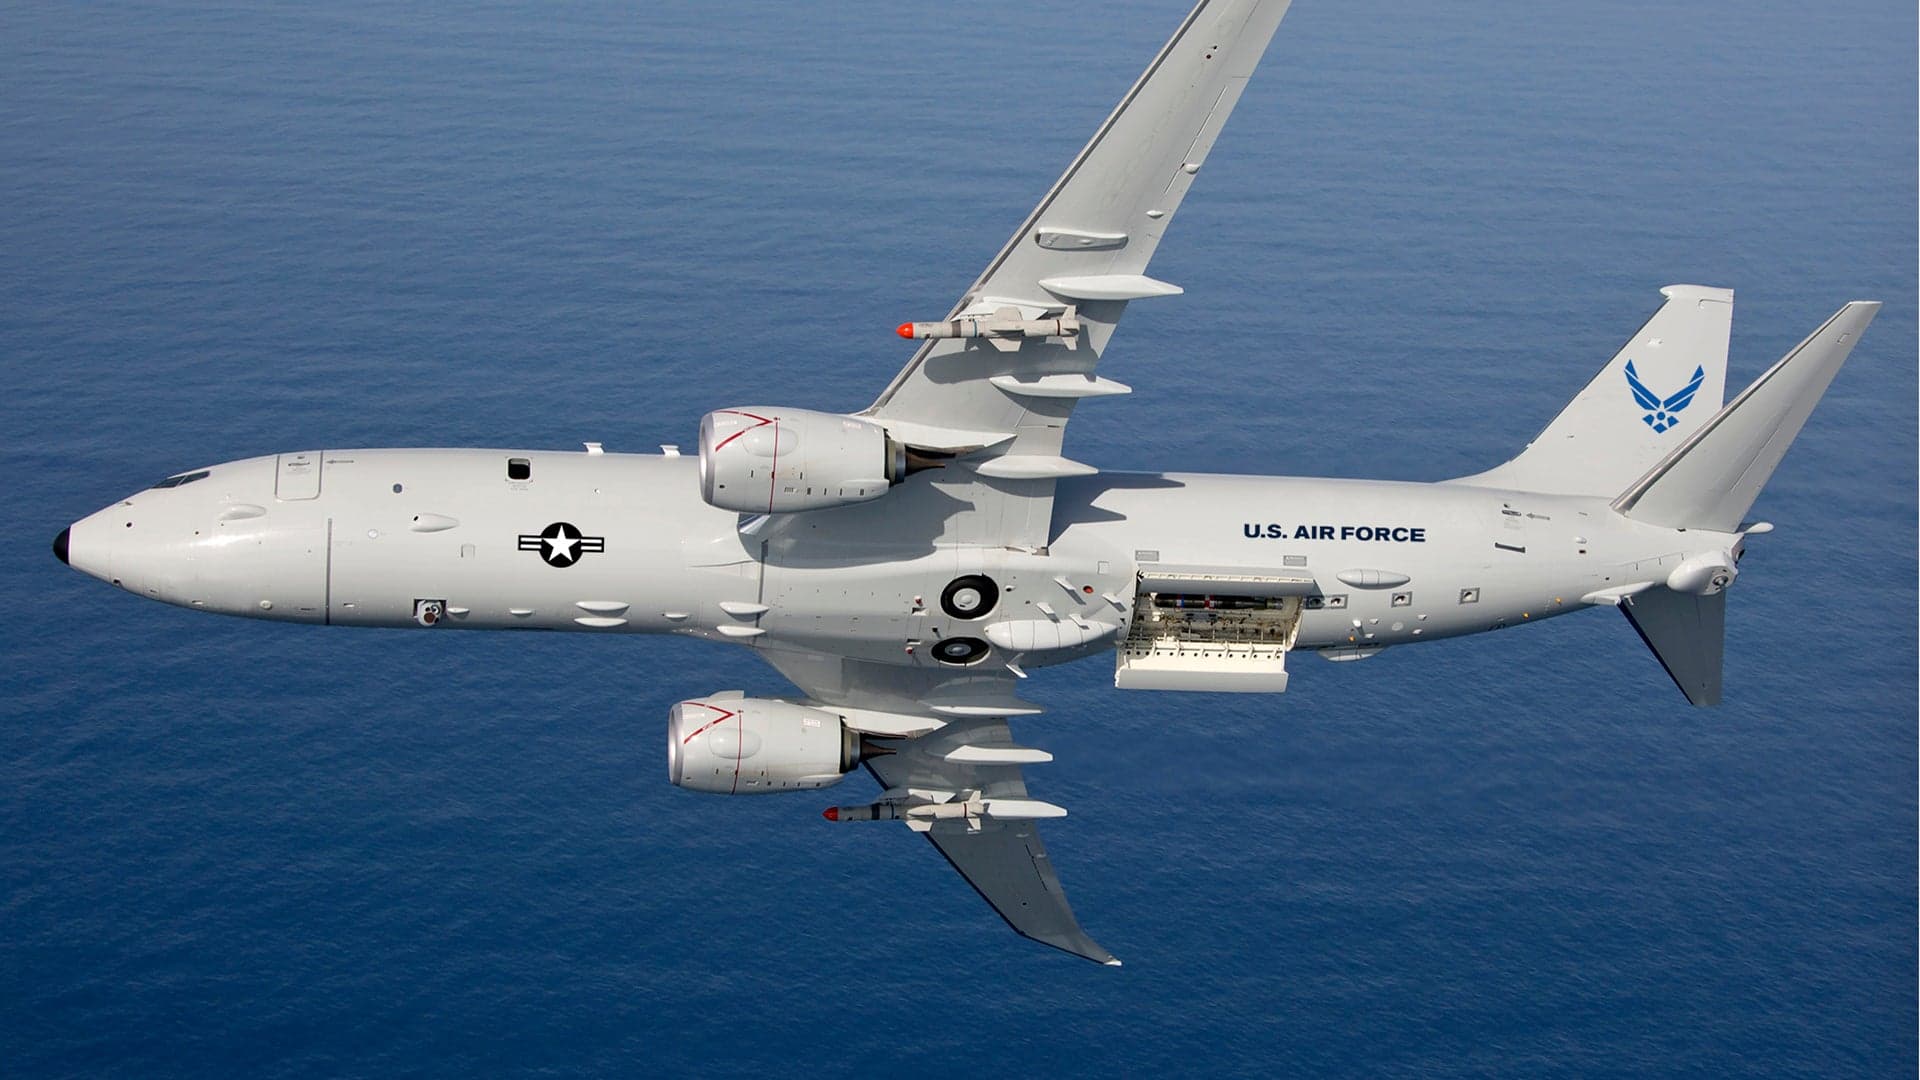 The Case For Stripping The P-8 Poseidon Down Into An RB-8 Multi-Role Arsenal Ship